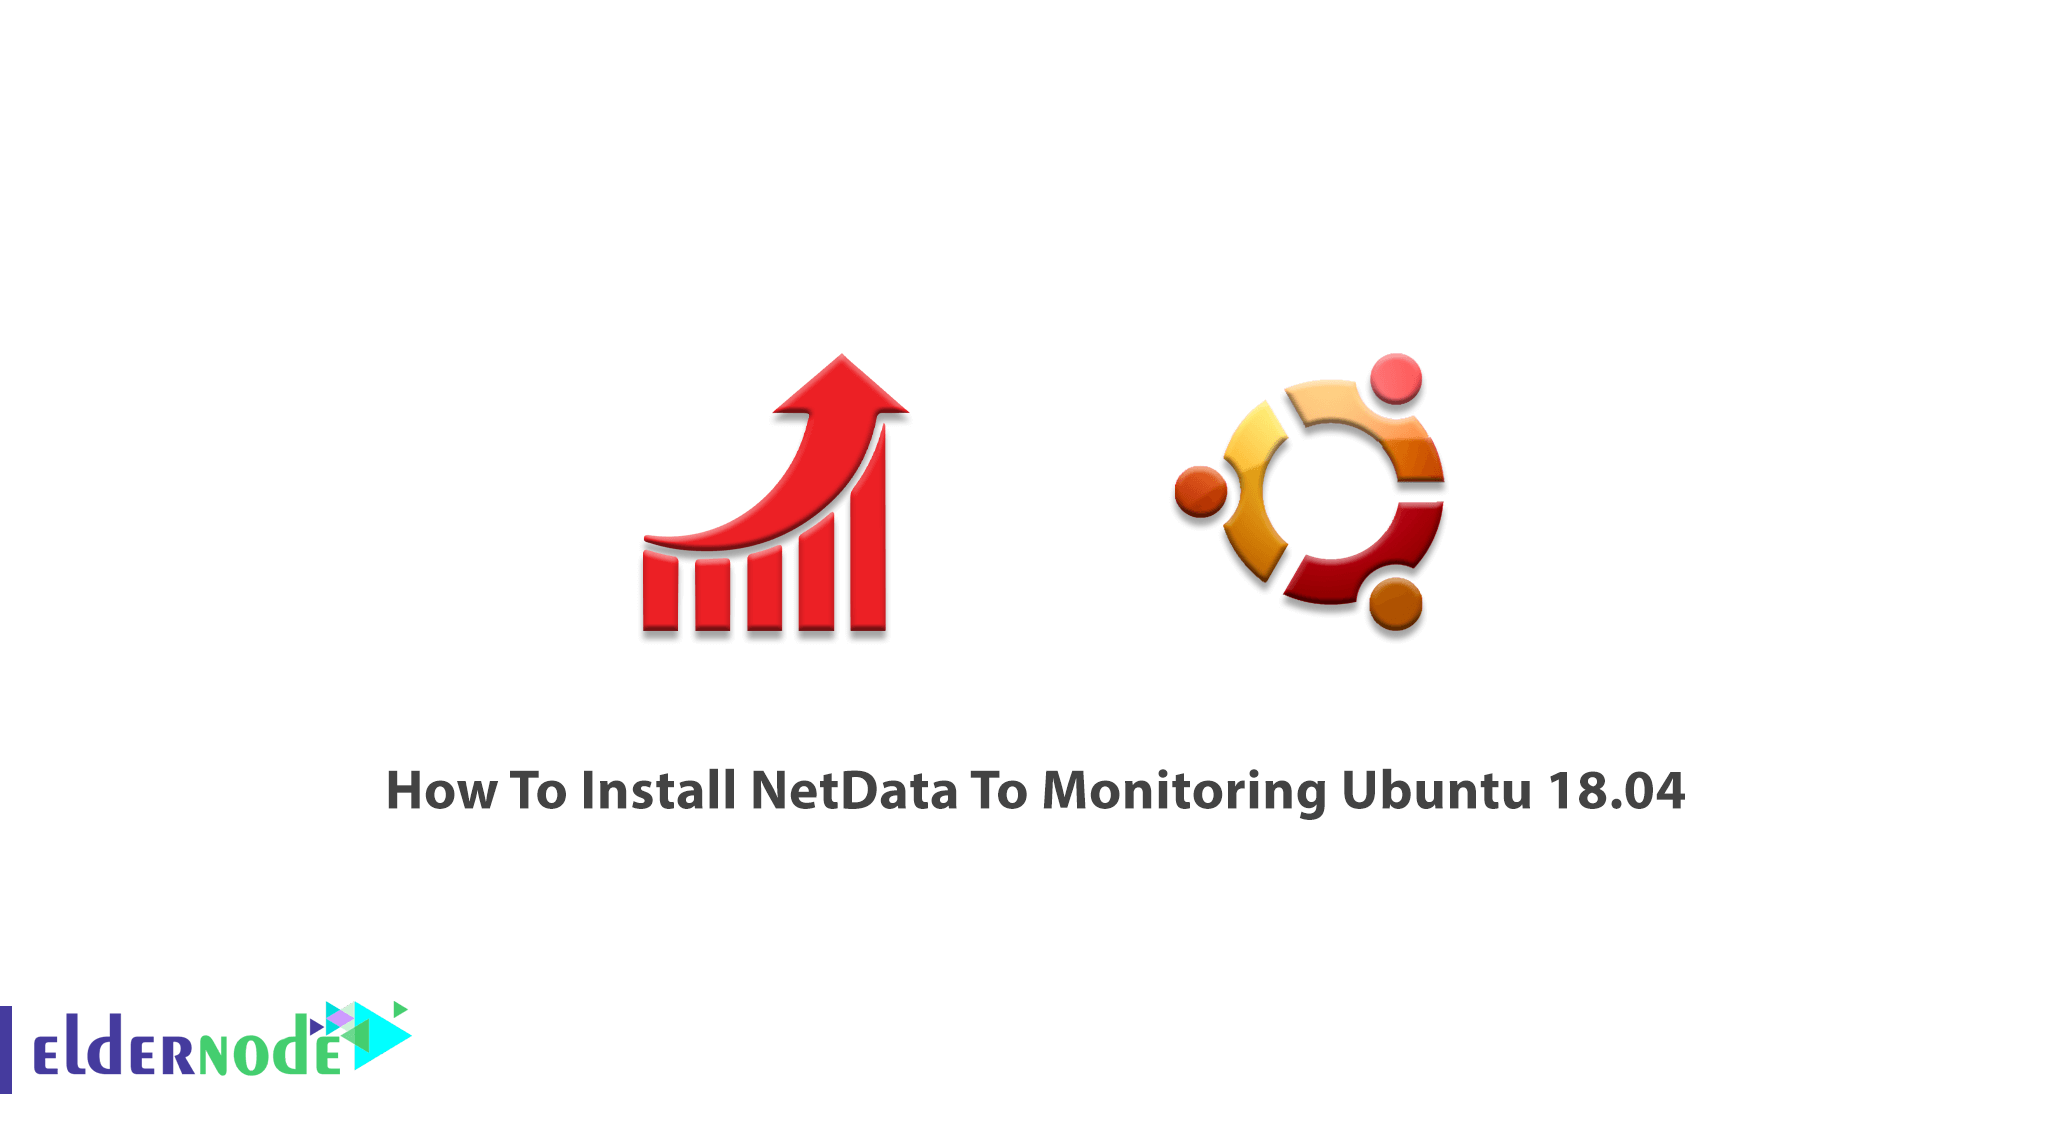 How To Install NetData To Monitoring Ubuntu 18.04